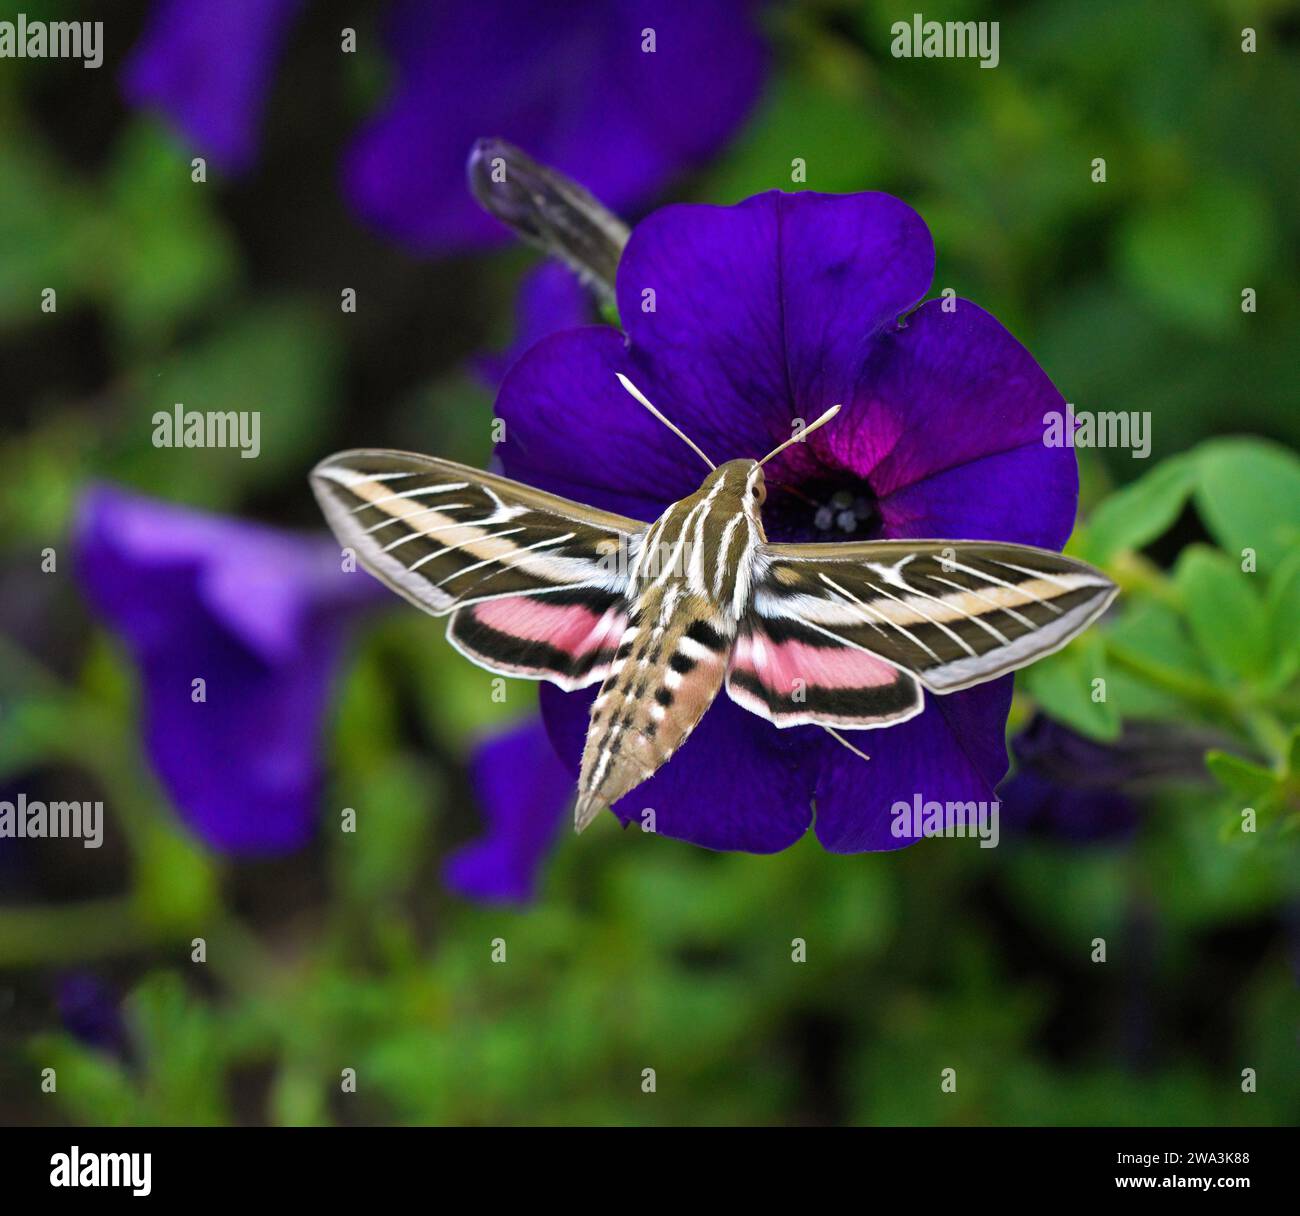 A White-Lined Sphinx Moth hovering in garden of purple Petunias. Stock Photo